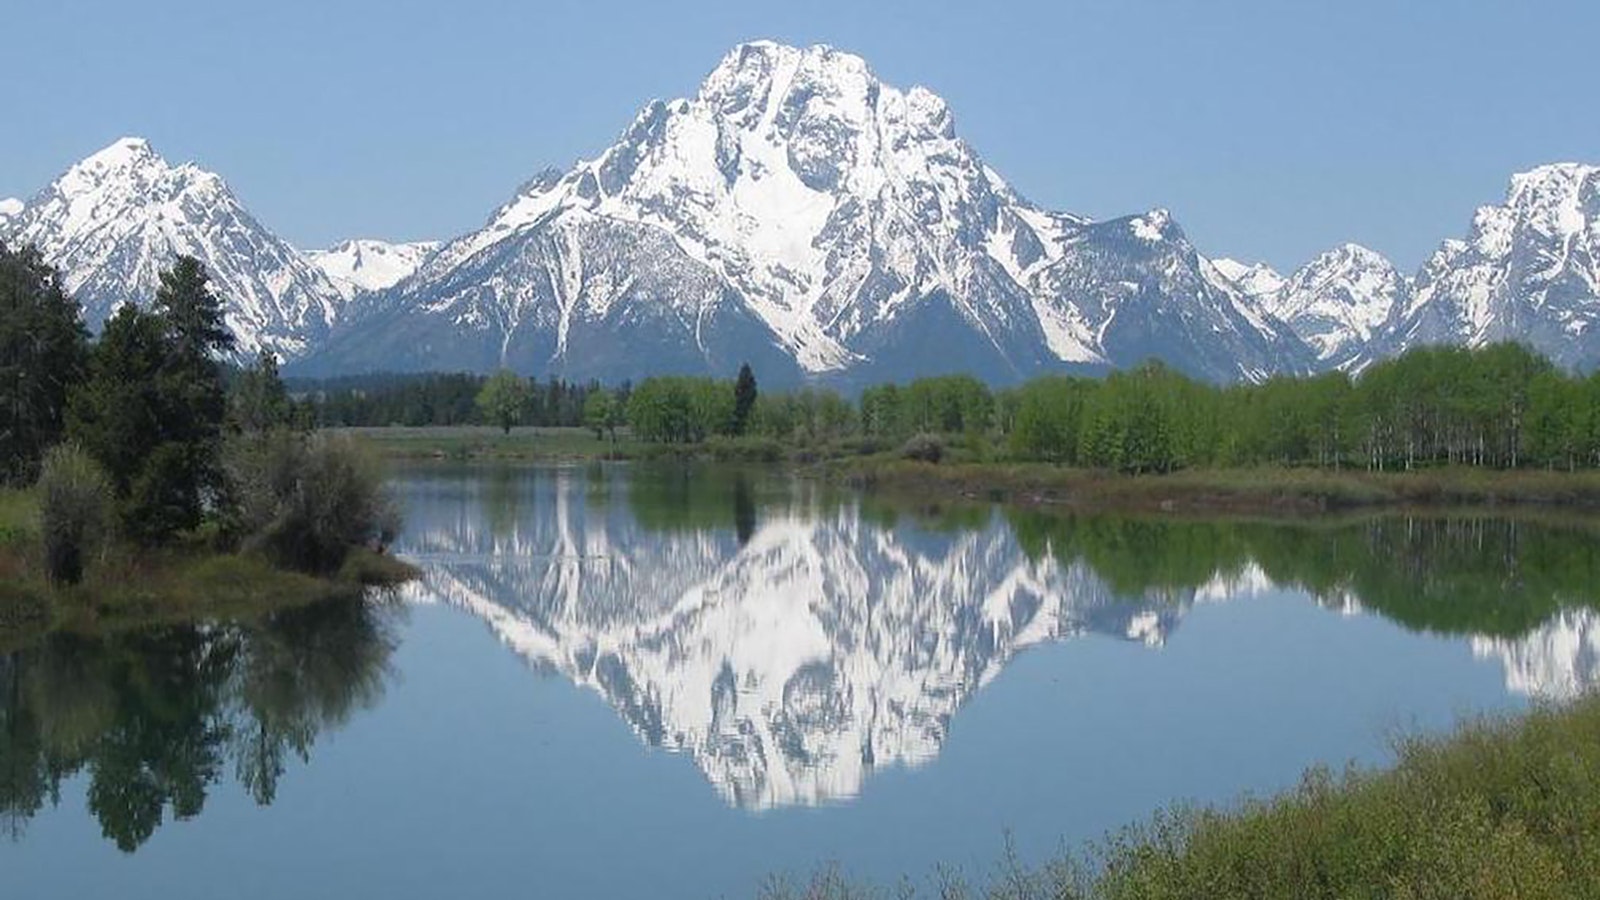 The Mount Moran lady in 2008.